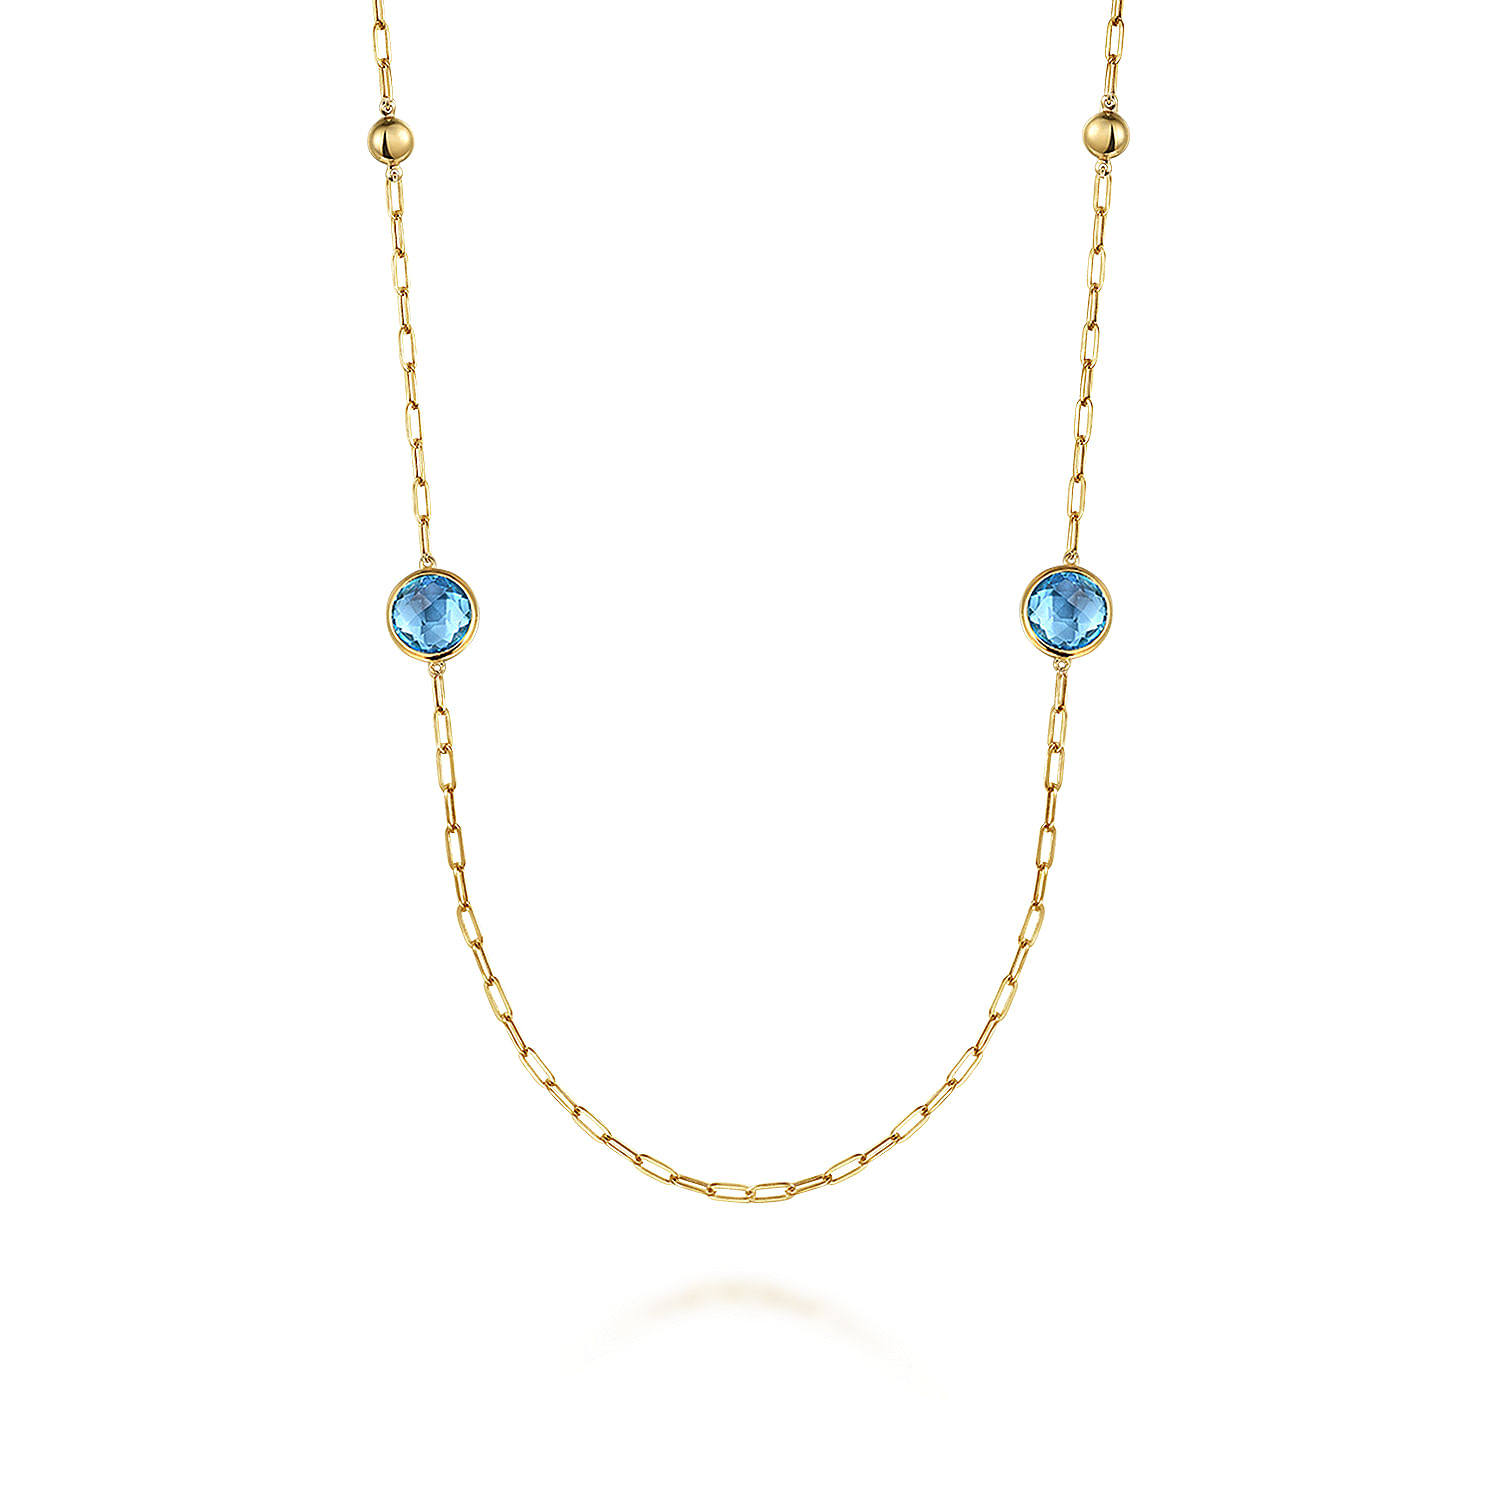 14K Yellow Gold Blue Topaz Round Shape Necklace With Four Stations ,Beads and Bezel Setting